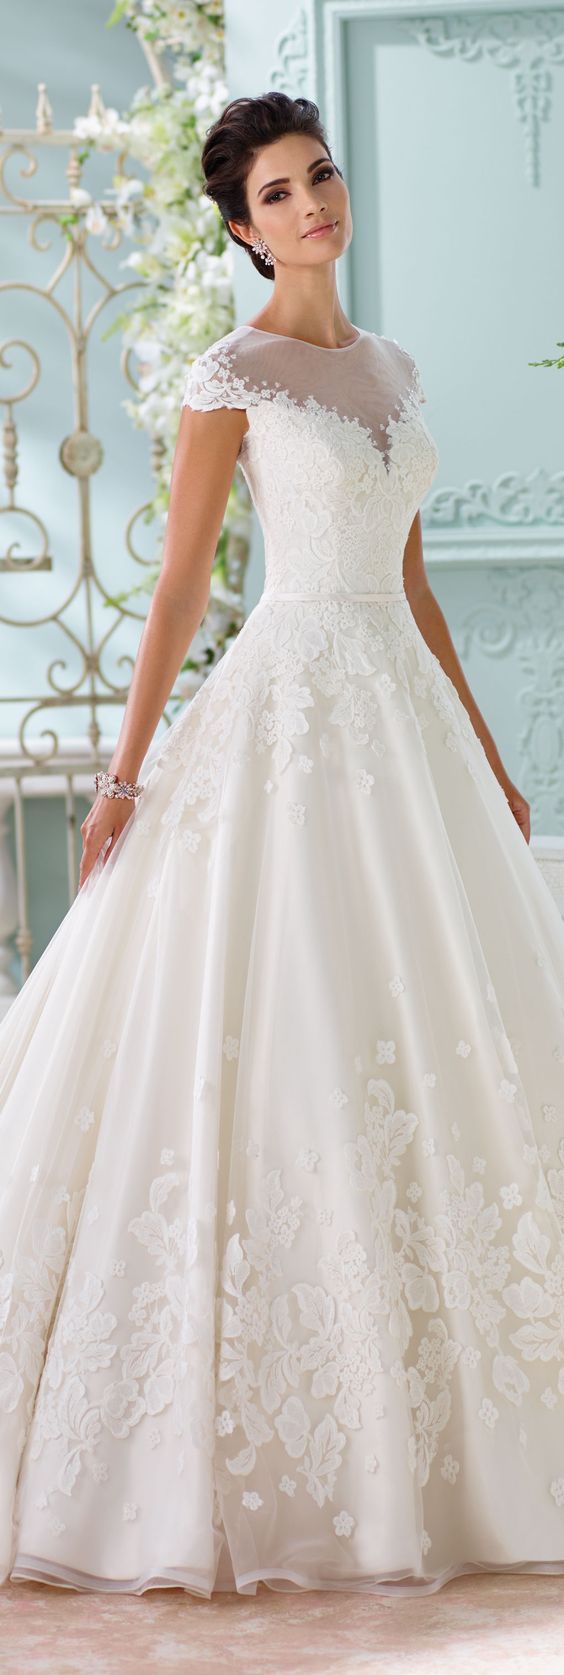 Mariage - Bridal Gown With Cap Sleeves